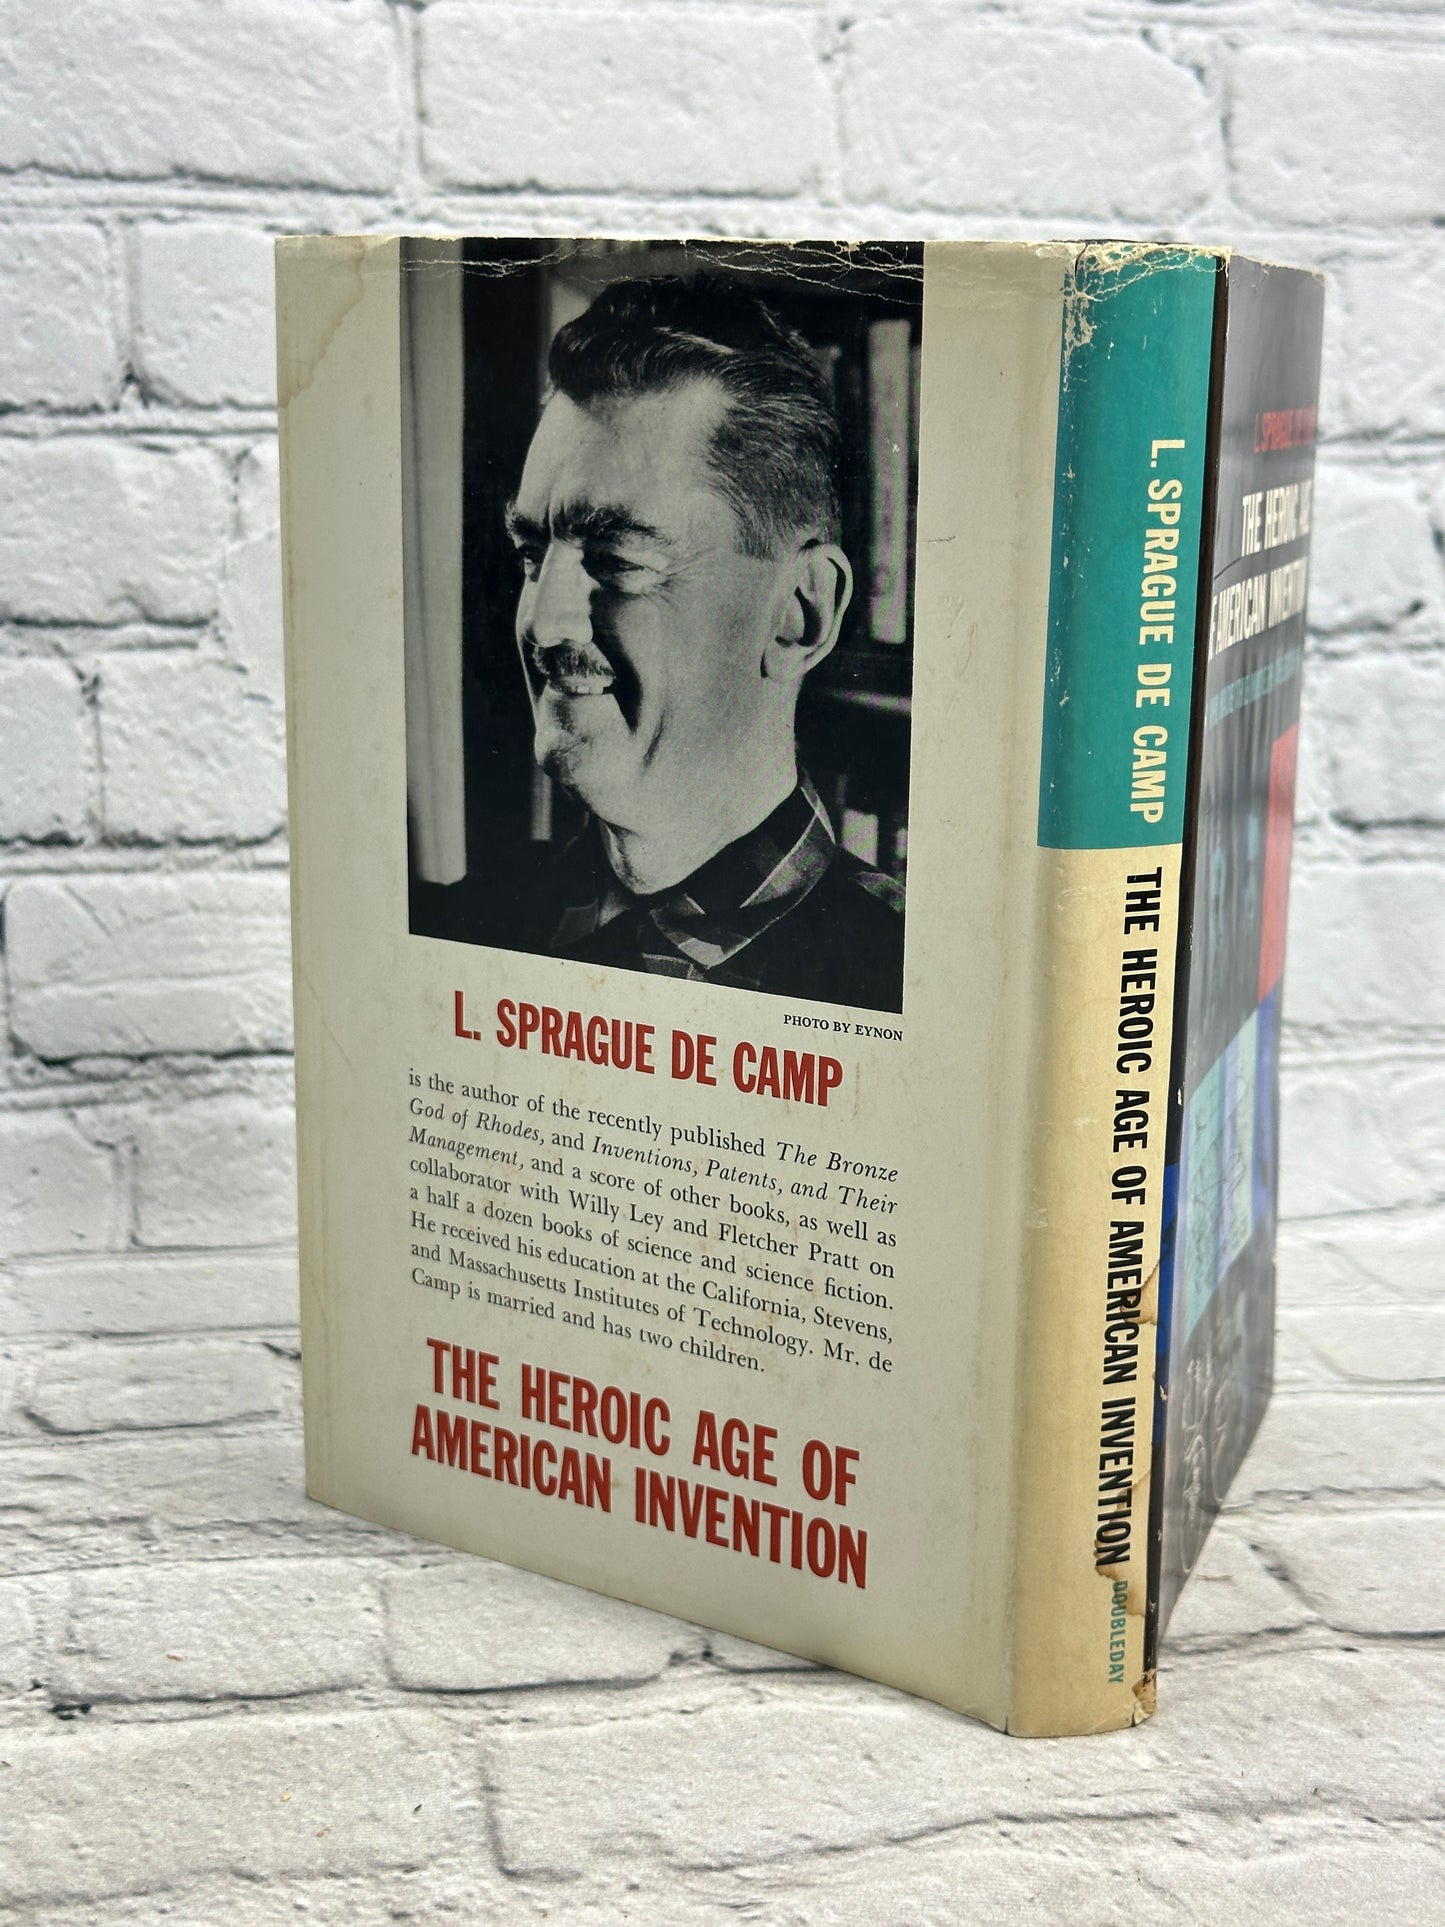 The Heroic Age of American Invention by L. Sprague De Camp [1961]